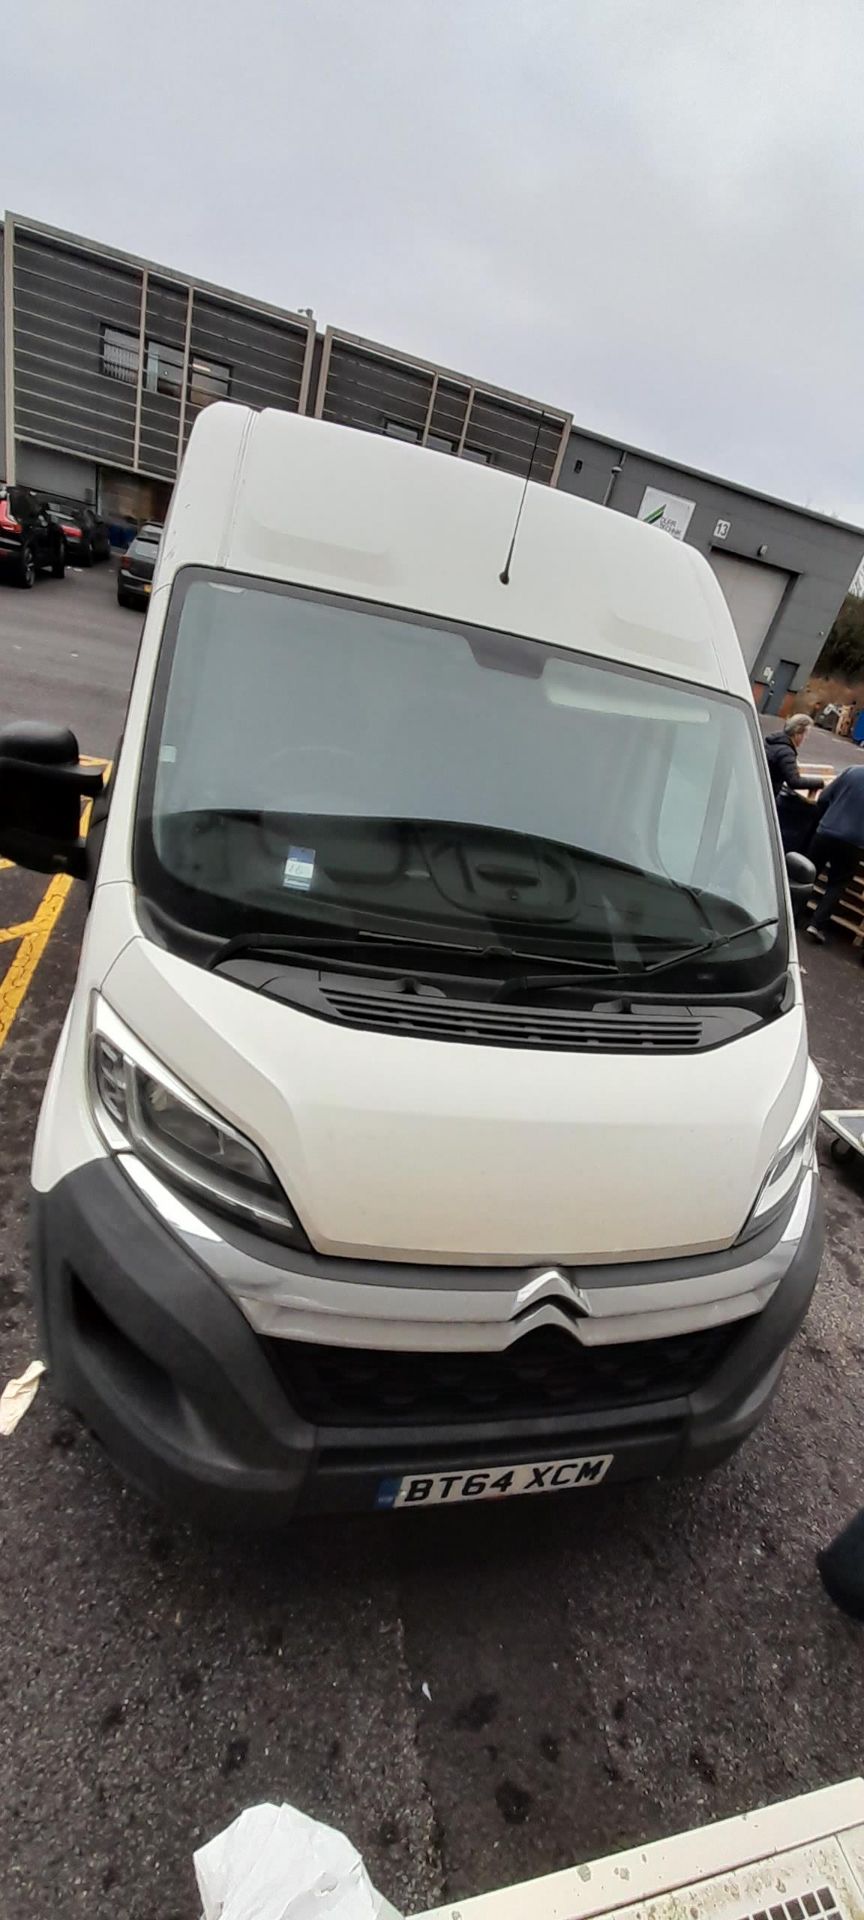 Citroen Relay Registration BT64 XCM, 104,109 miles - This vehicle does not have a V5C Document, the - Image 6 of 11